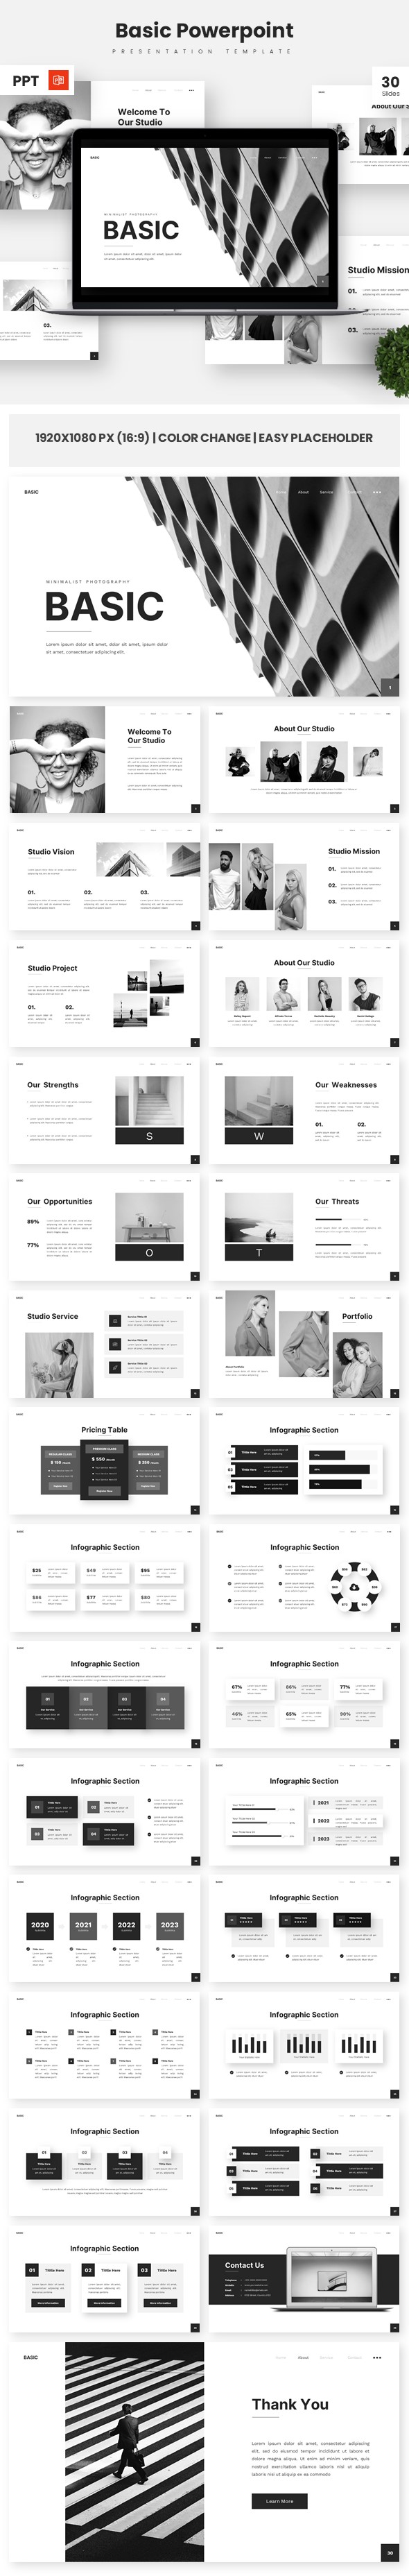 [DOWNLOAD]Basic - Minimalist Photography Powerpoint Templates